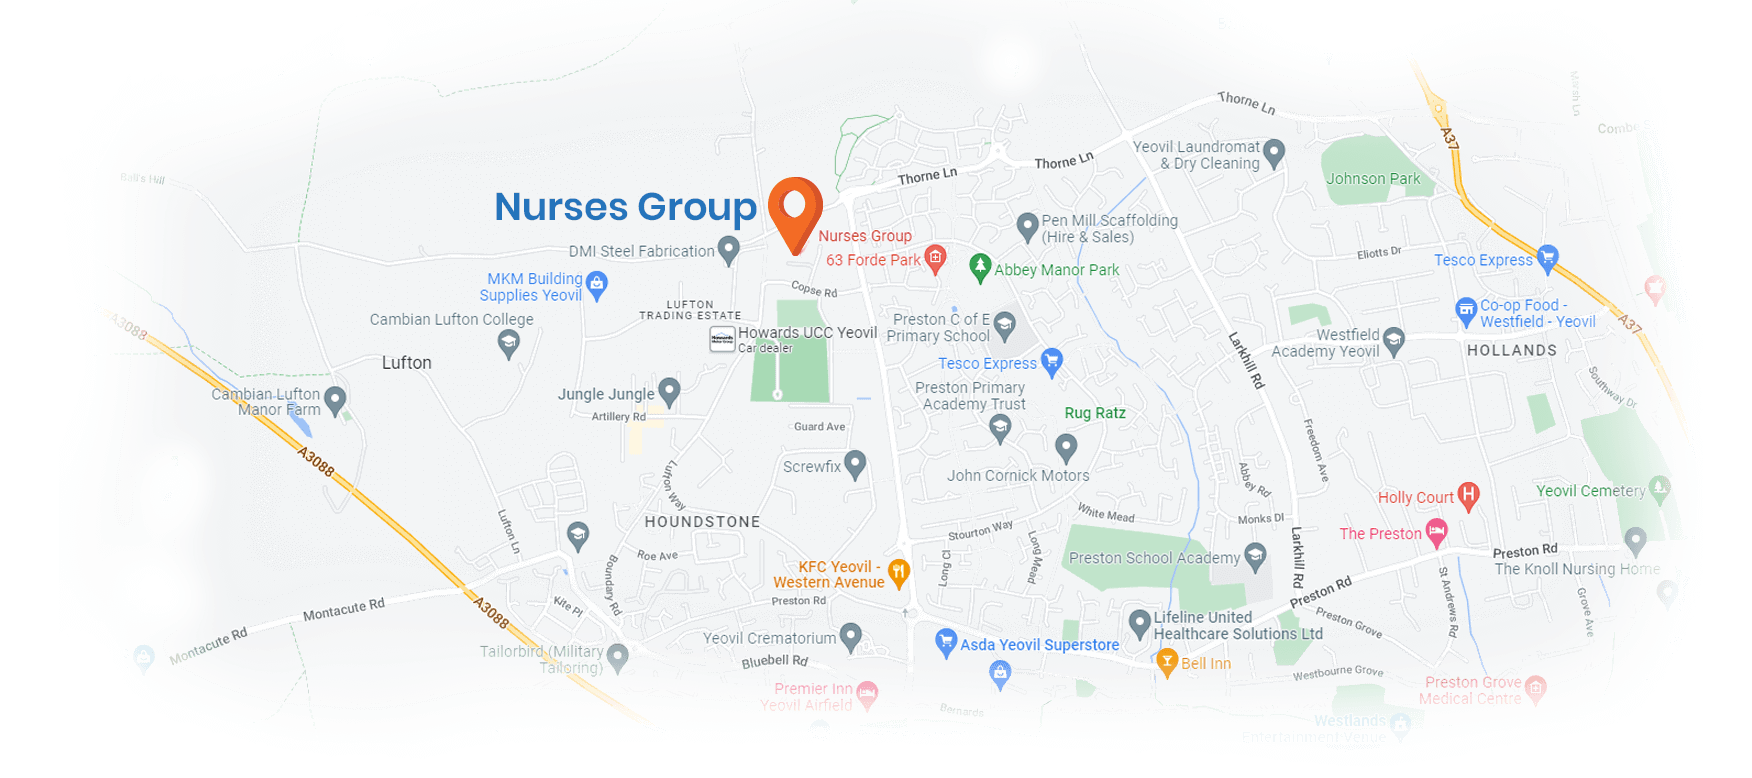 Nurses Group has branches in Yeovil and UK